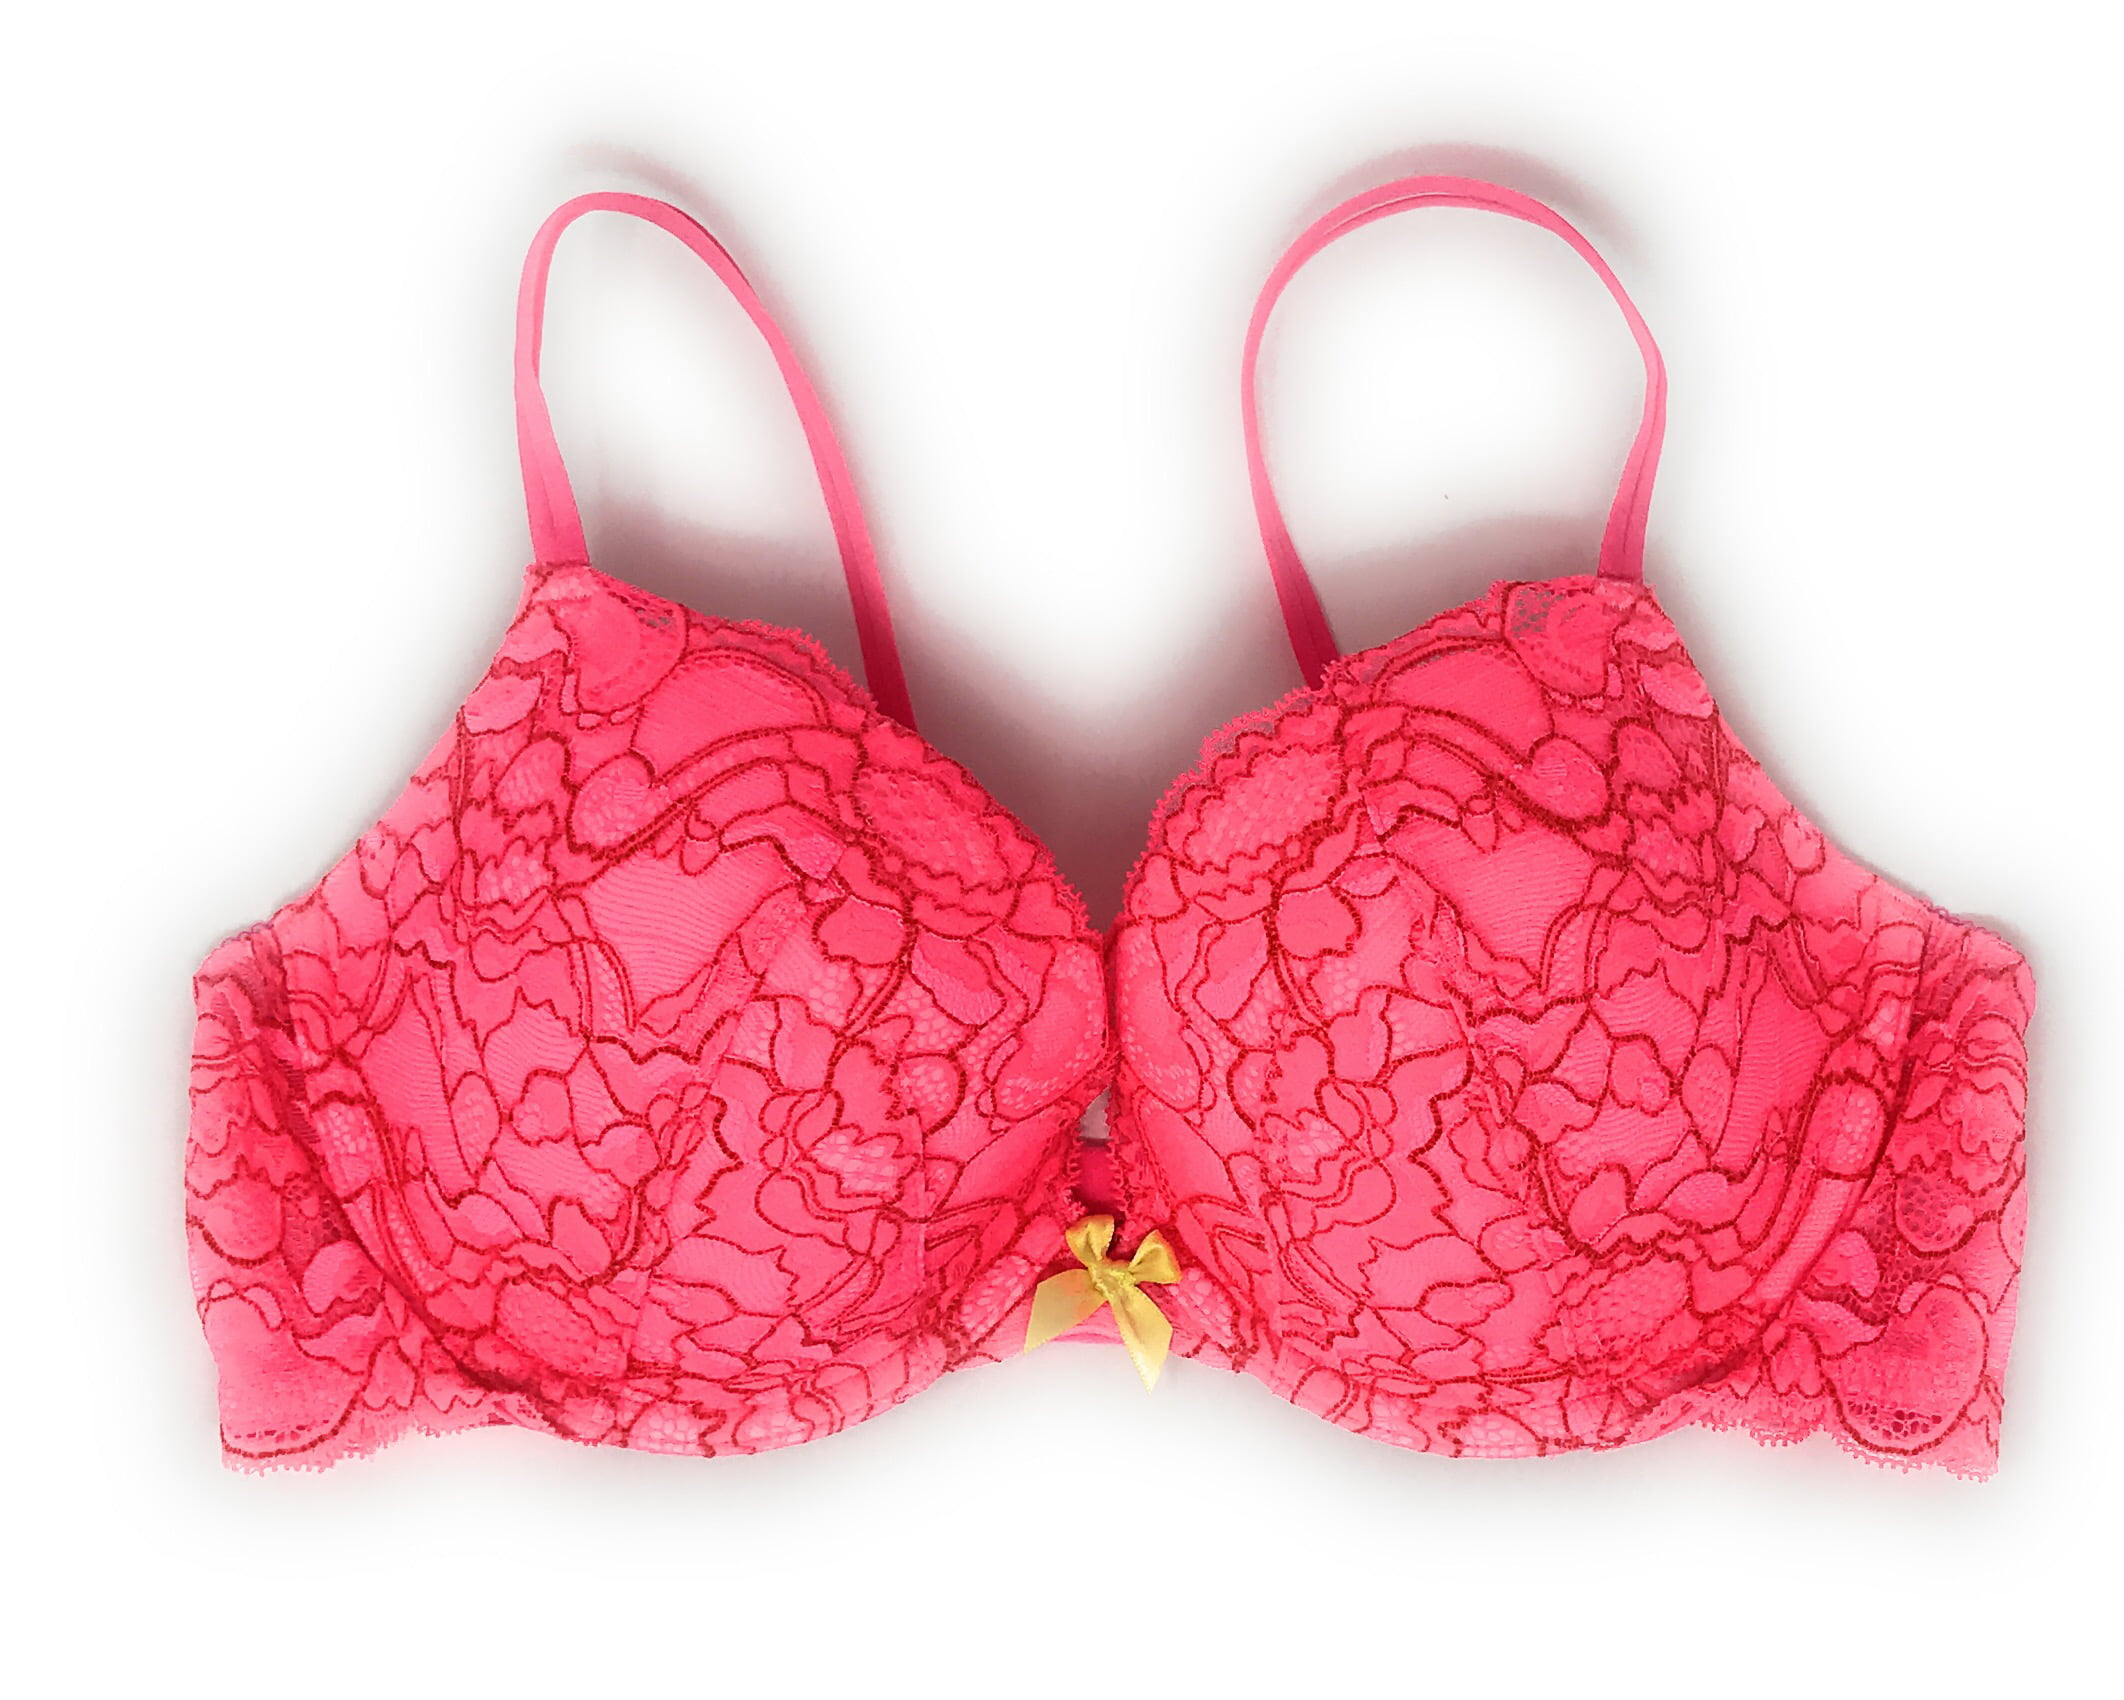 NWT VICTORIA'S SECRET VERY SEXY PUSH UP BRA 38DD HOT PINK CRYSTALS RETIRED